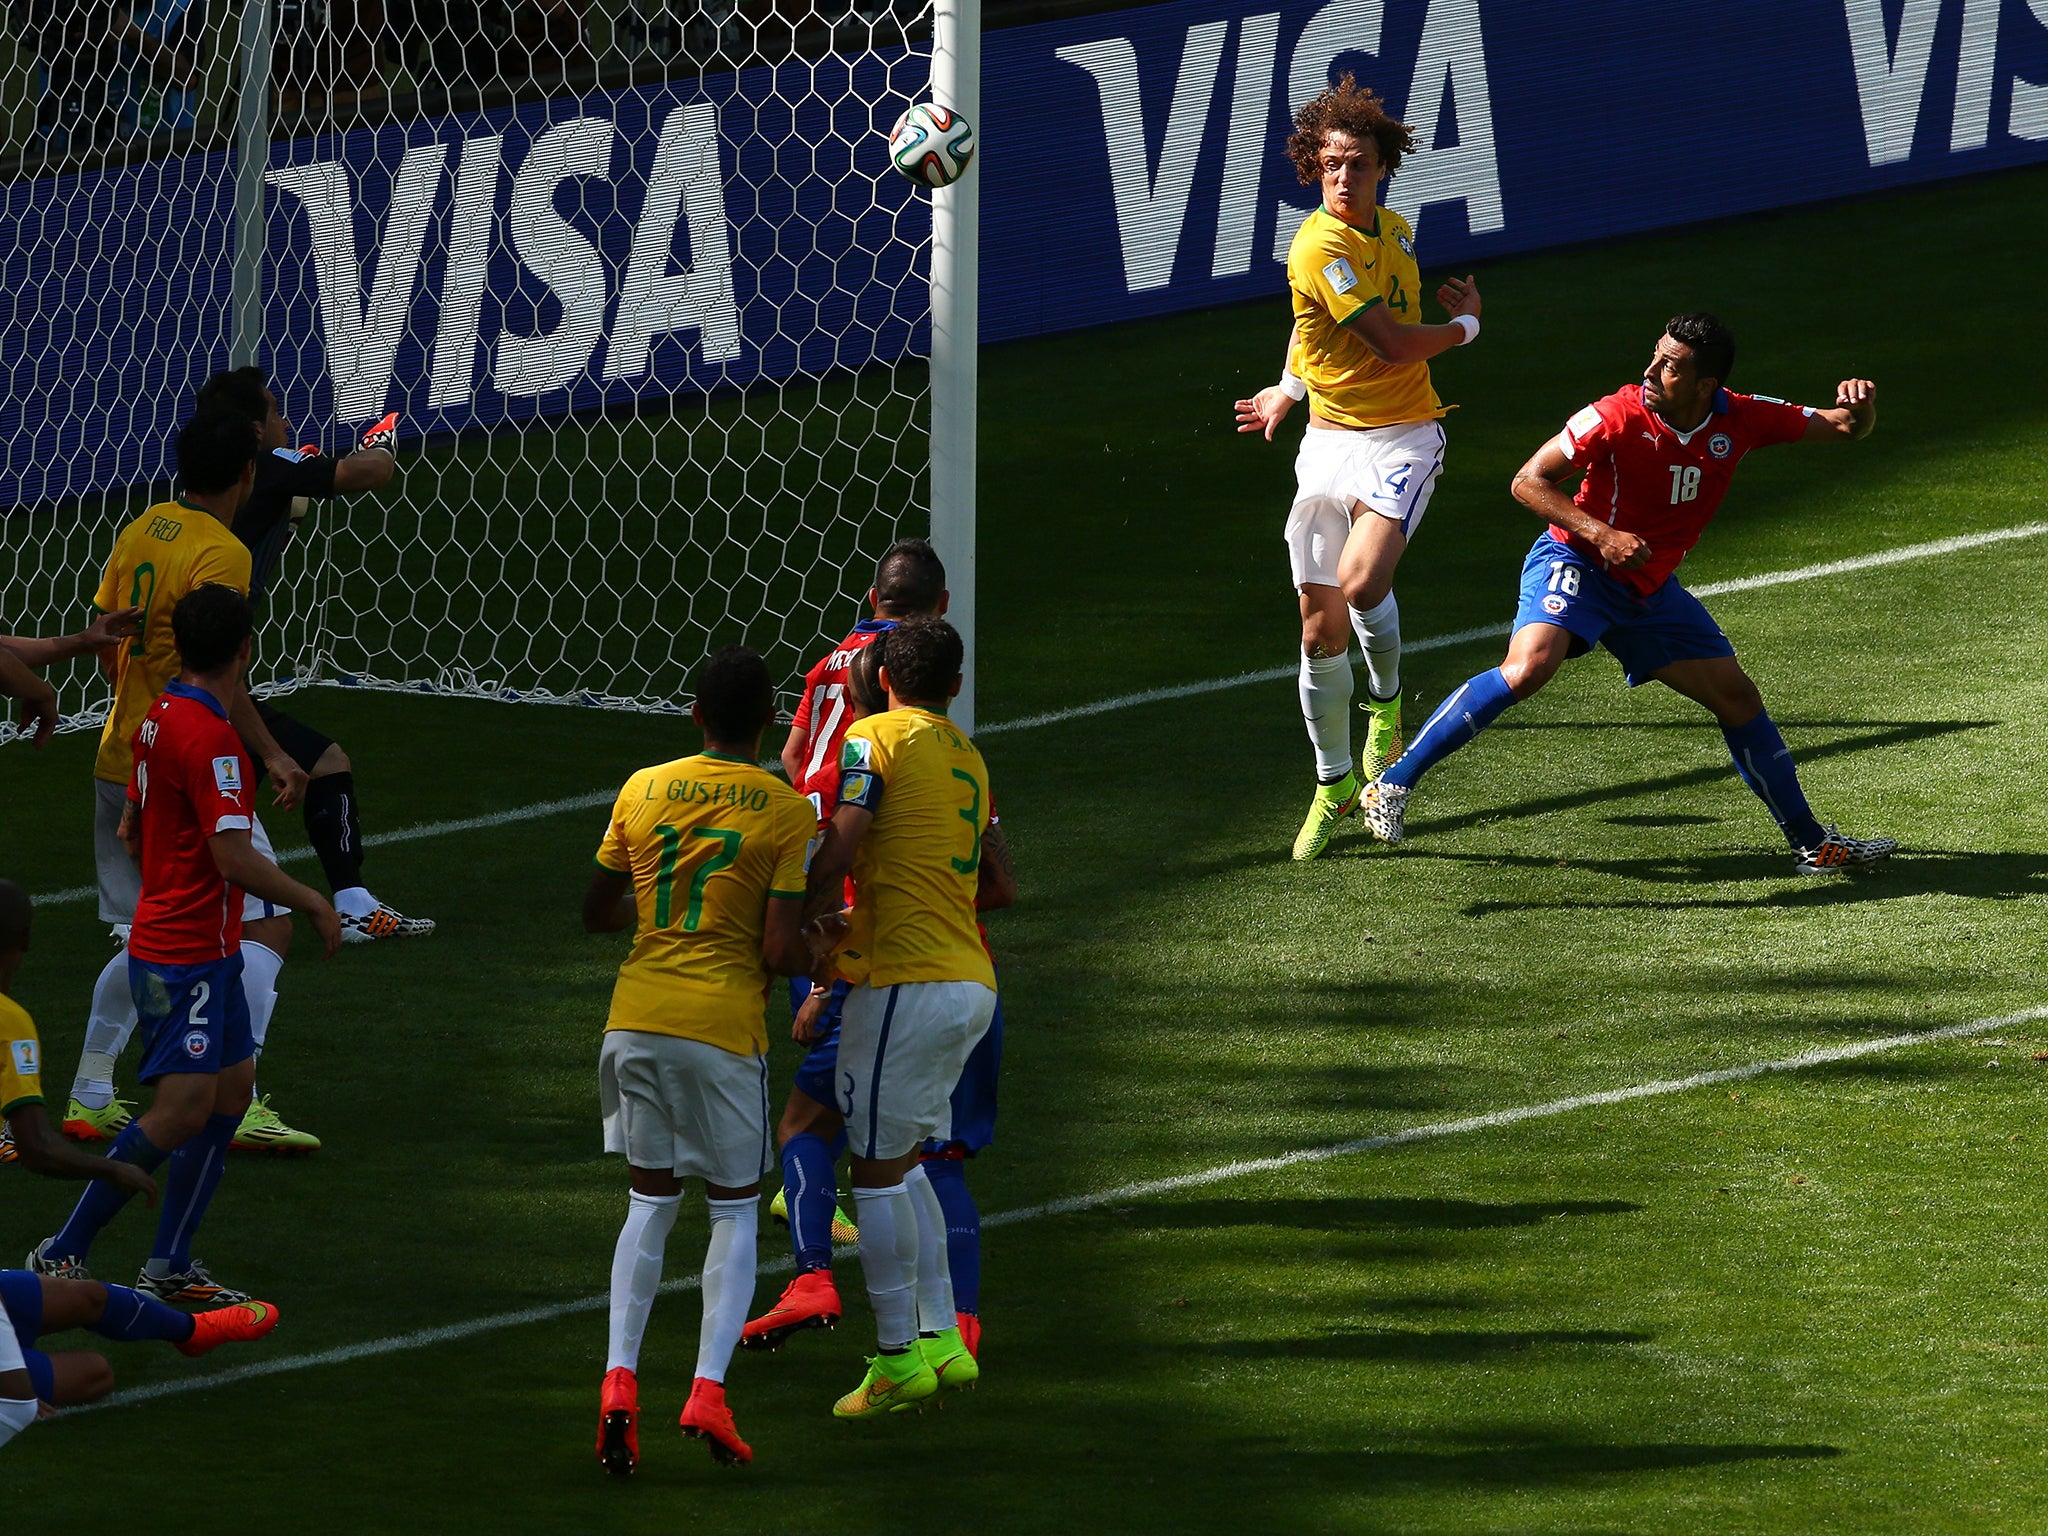 David Luiz and Gonzalo Jara both went for the ball before it went in the back of the net for Brazil